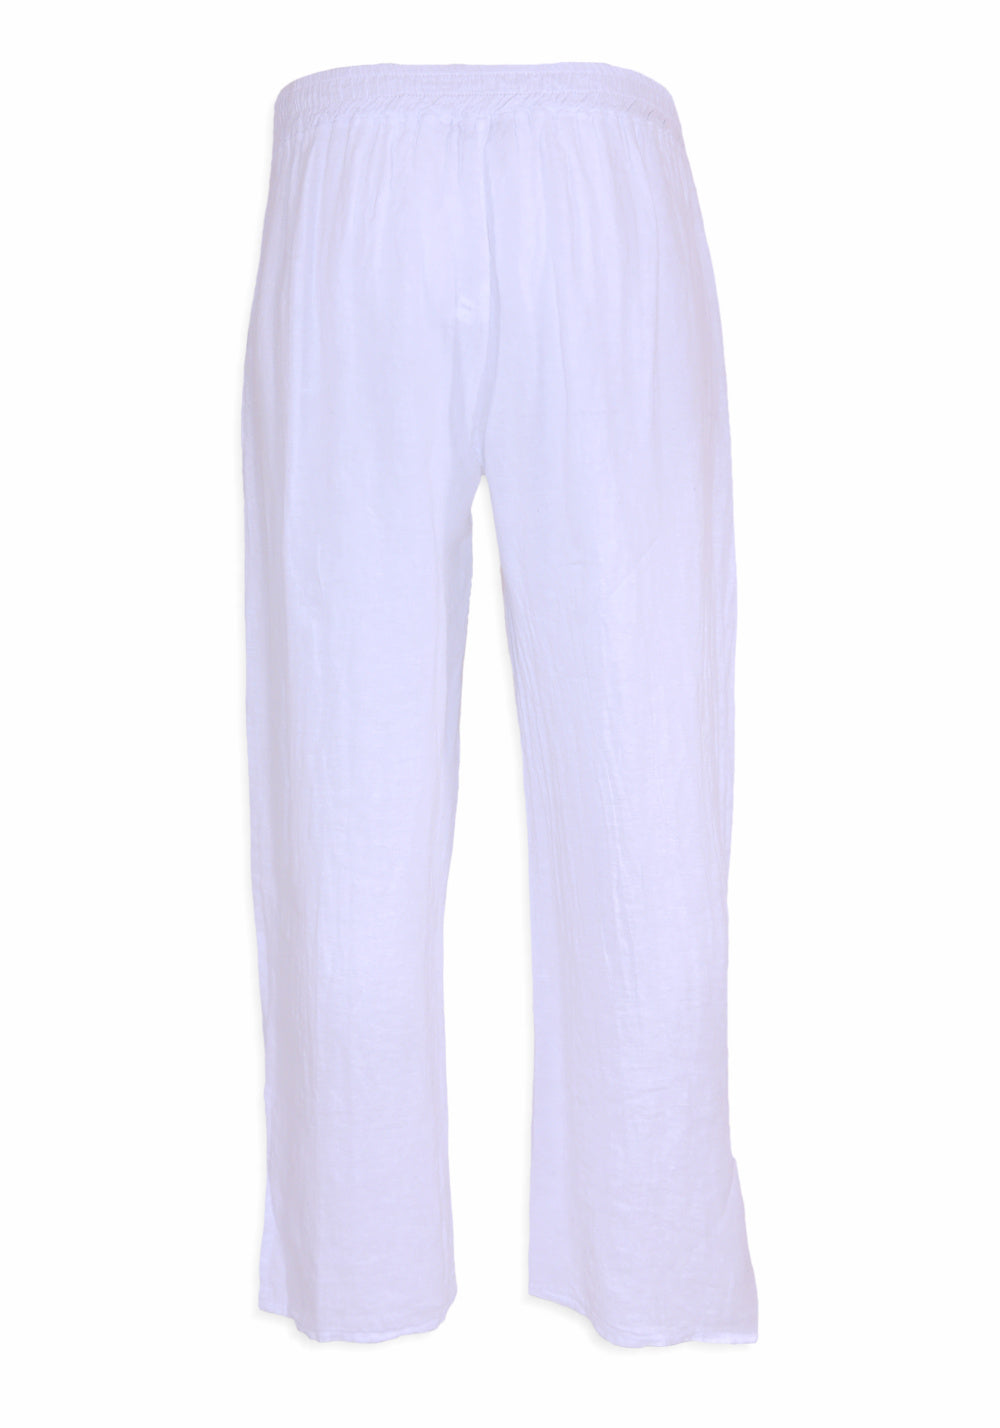 LINEN LOUNGE PANTS WITH SIDE SLITS (WHITE) - PISTACHE